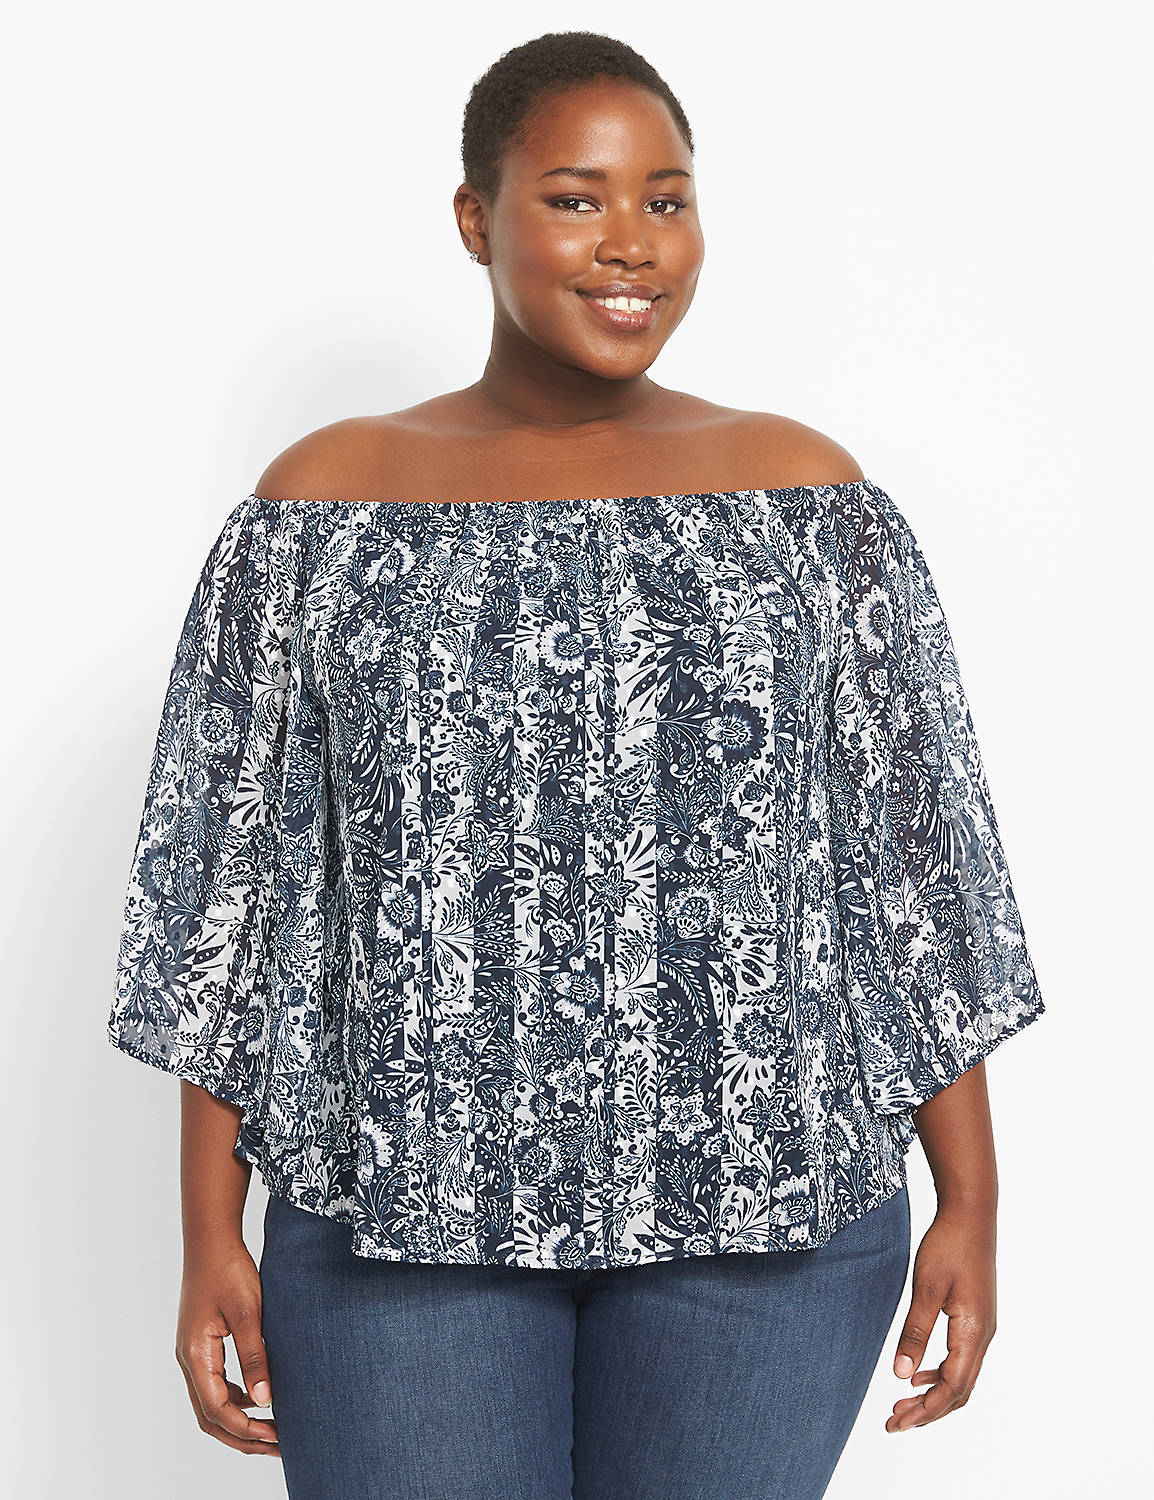 lane bryant relaxed off-the-shoulder blouse 14/16 navy floral